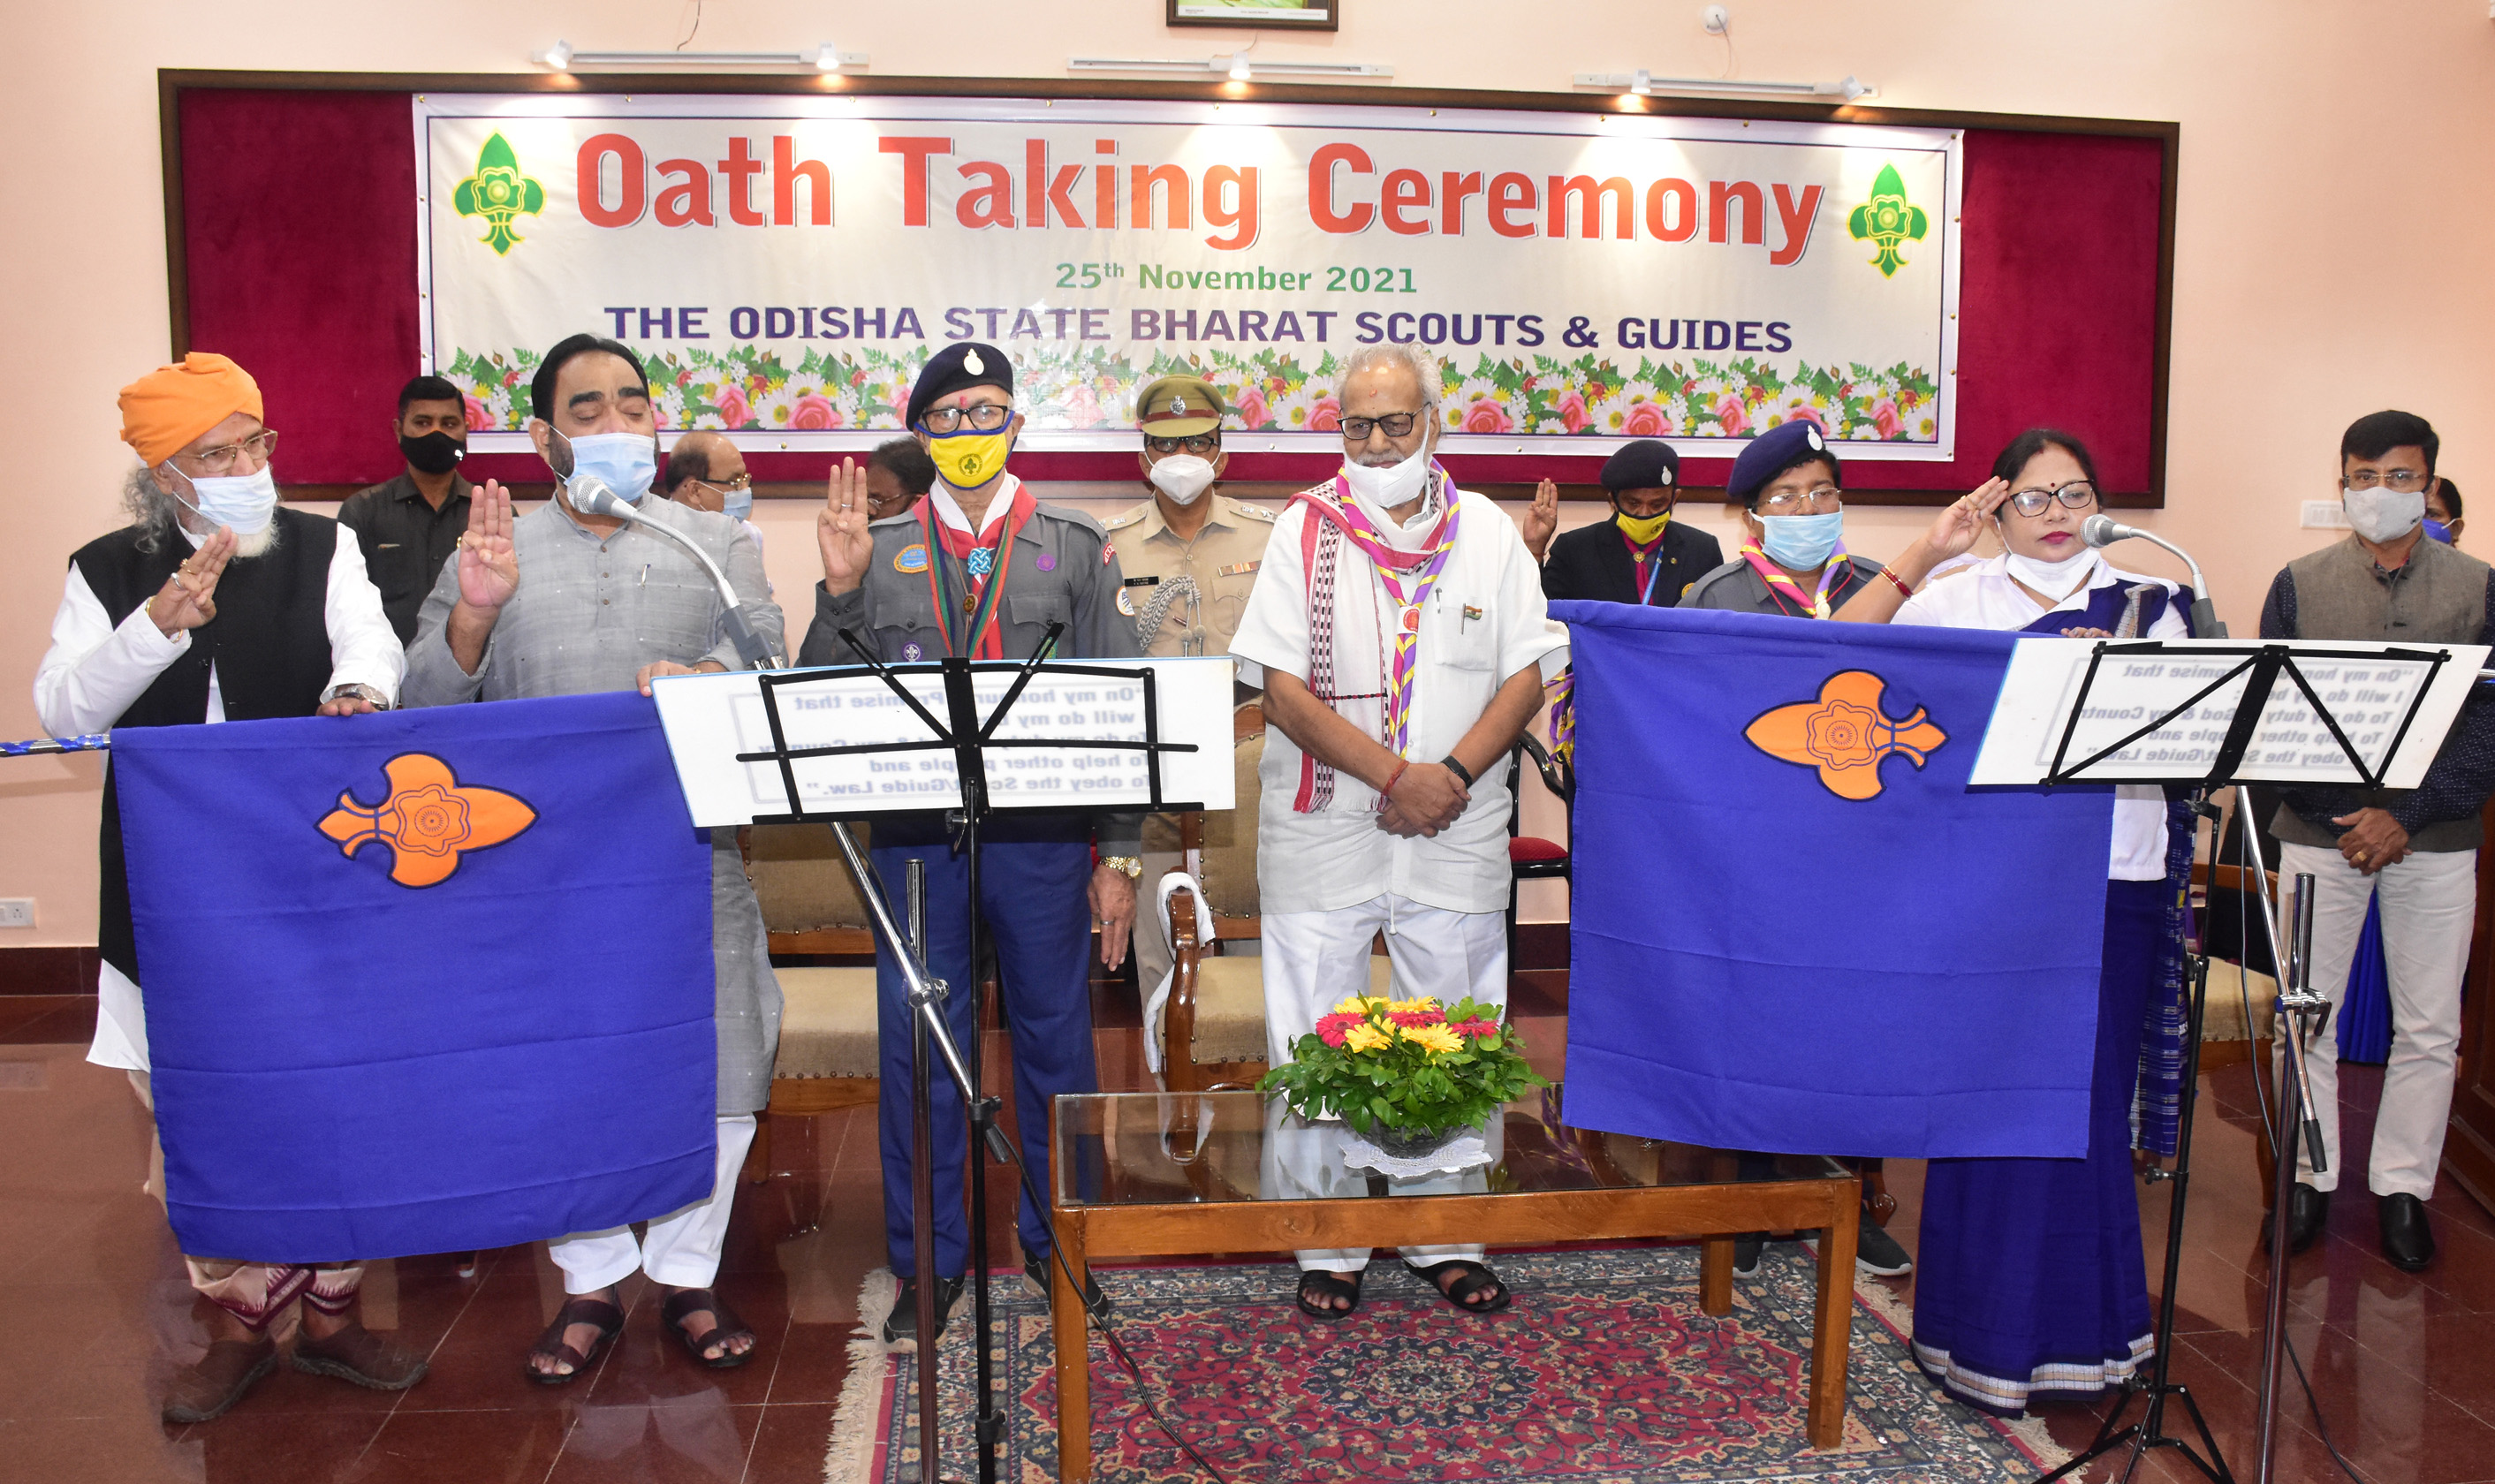 Hon'ble Governor Prof Ganeshi Lal administering oath to office bearers in oath taking ceremony of Odisha State Bharat Scouts and Guides at Rajbhawan on 25.11.2021.